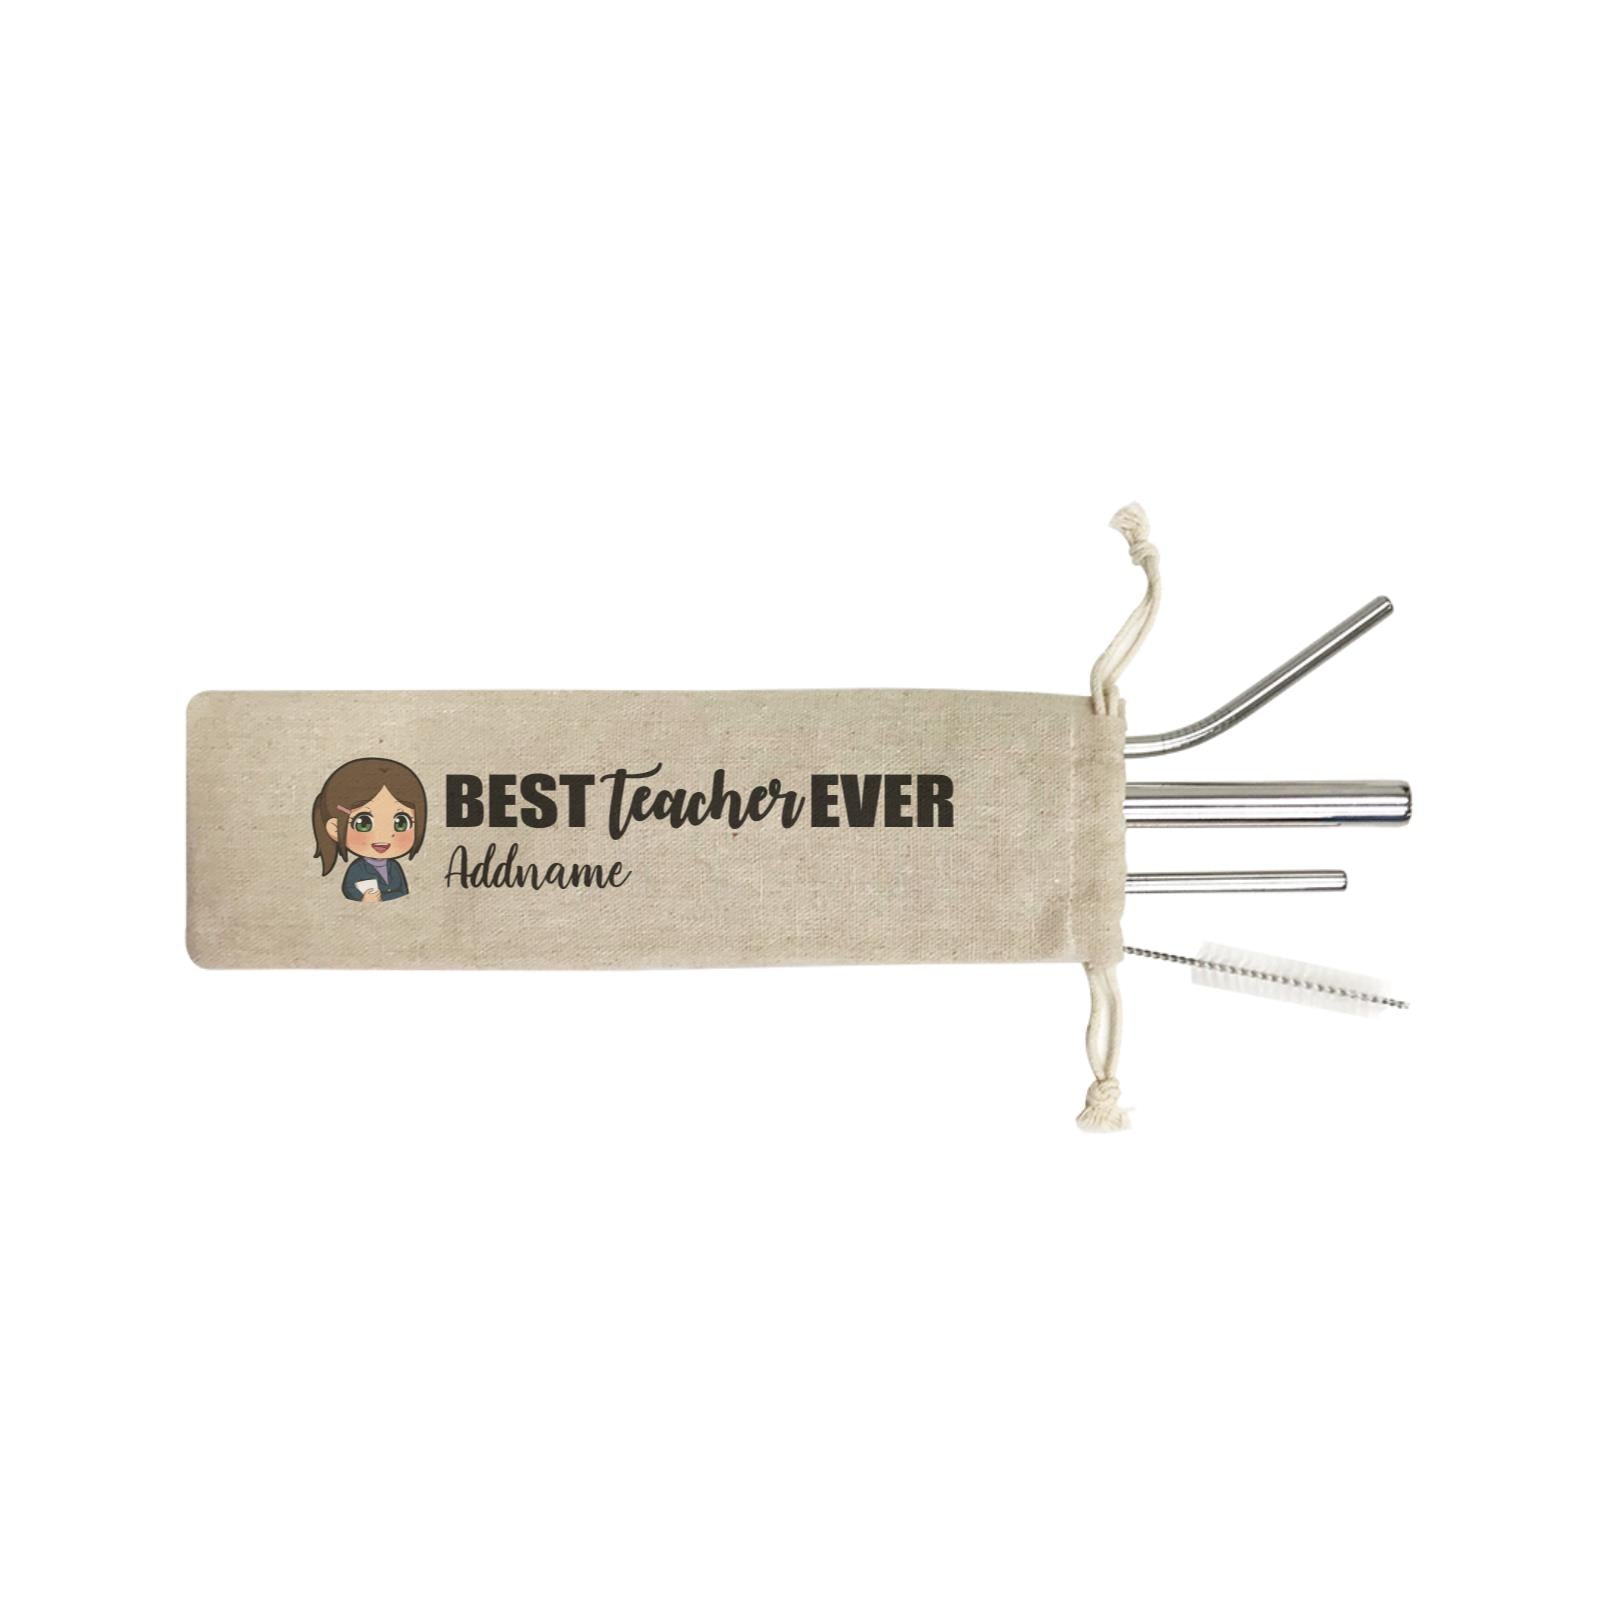 Chibi Teachers Chinese Woman Best Teacher Ever Addname SB 4-In-1 Stainless Steel Straw Set in Satchel